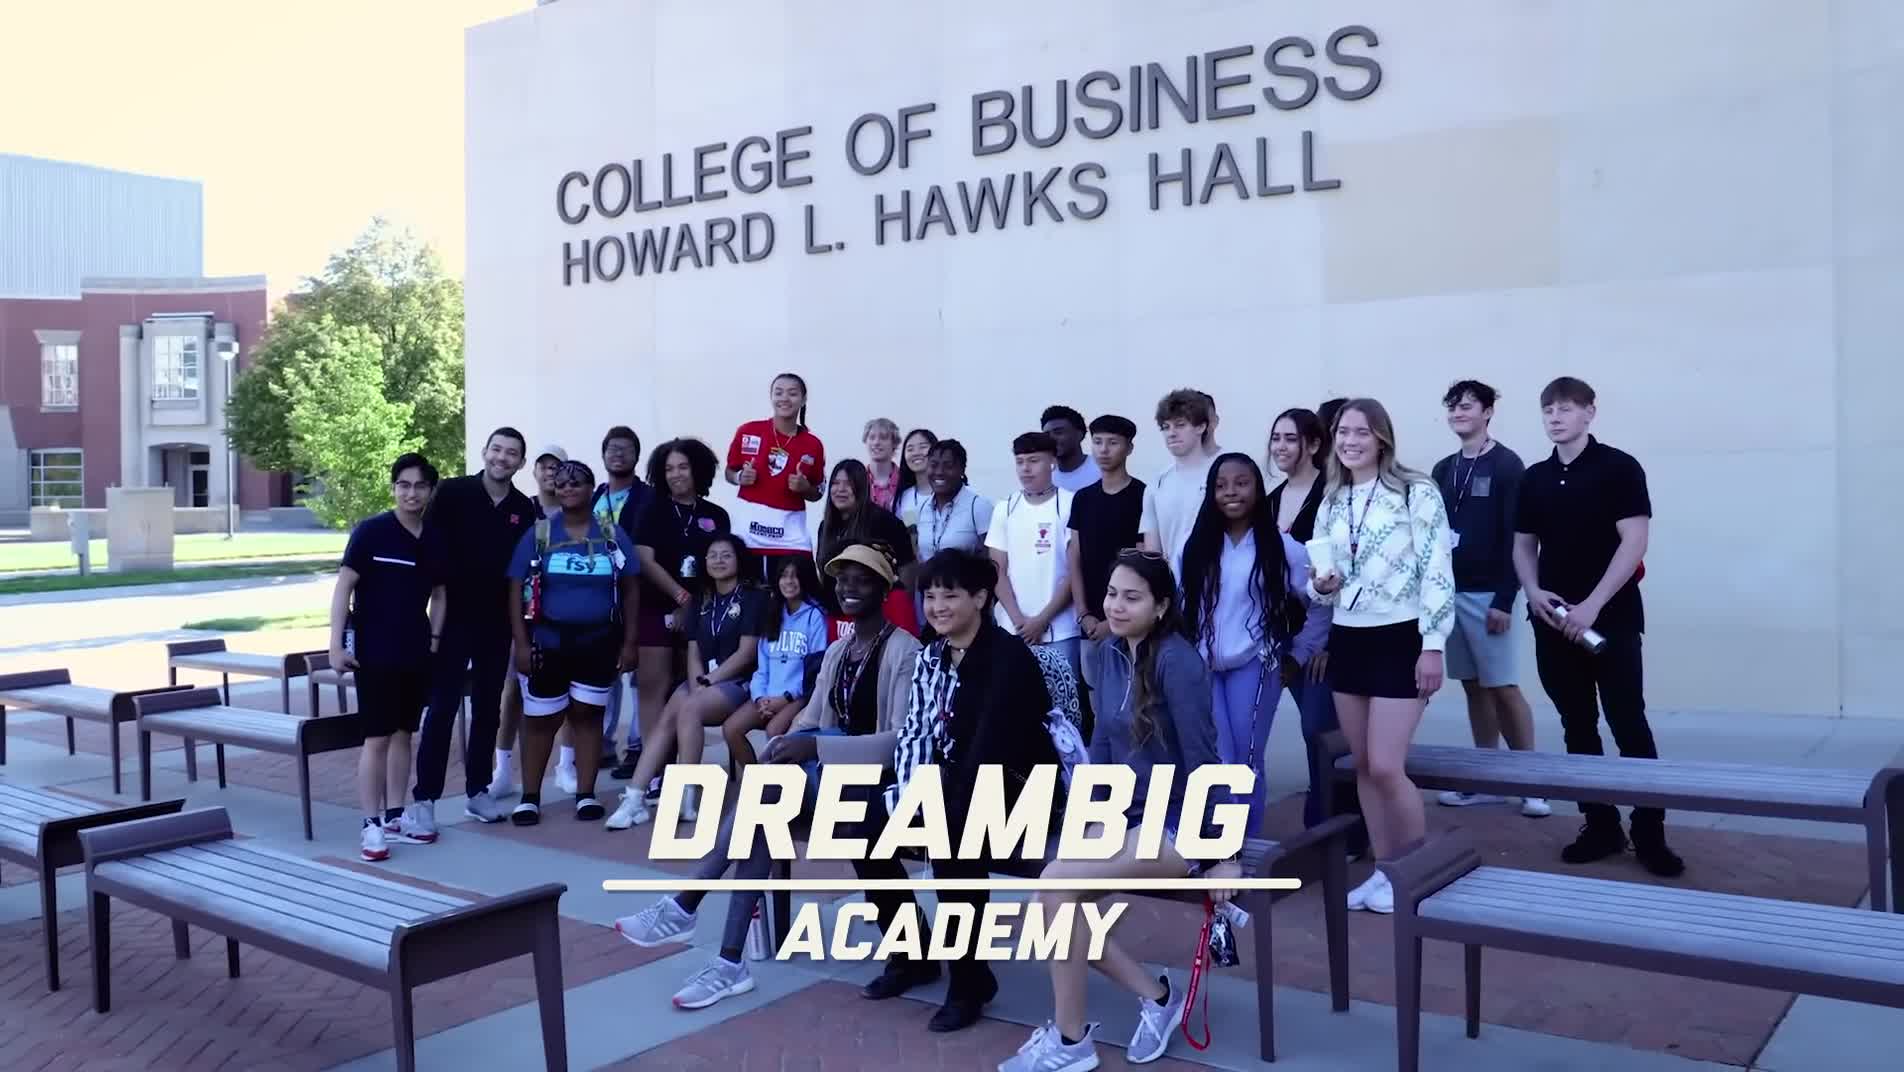 DREAMBIG Academy: Launch Your Future Here